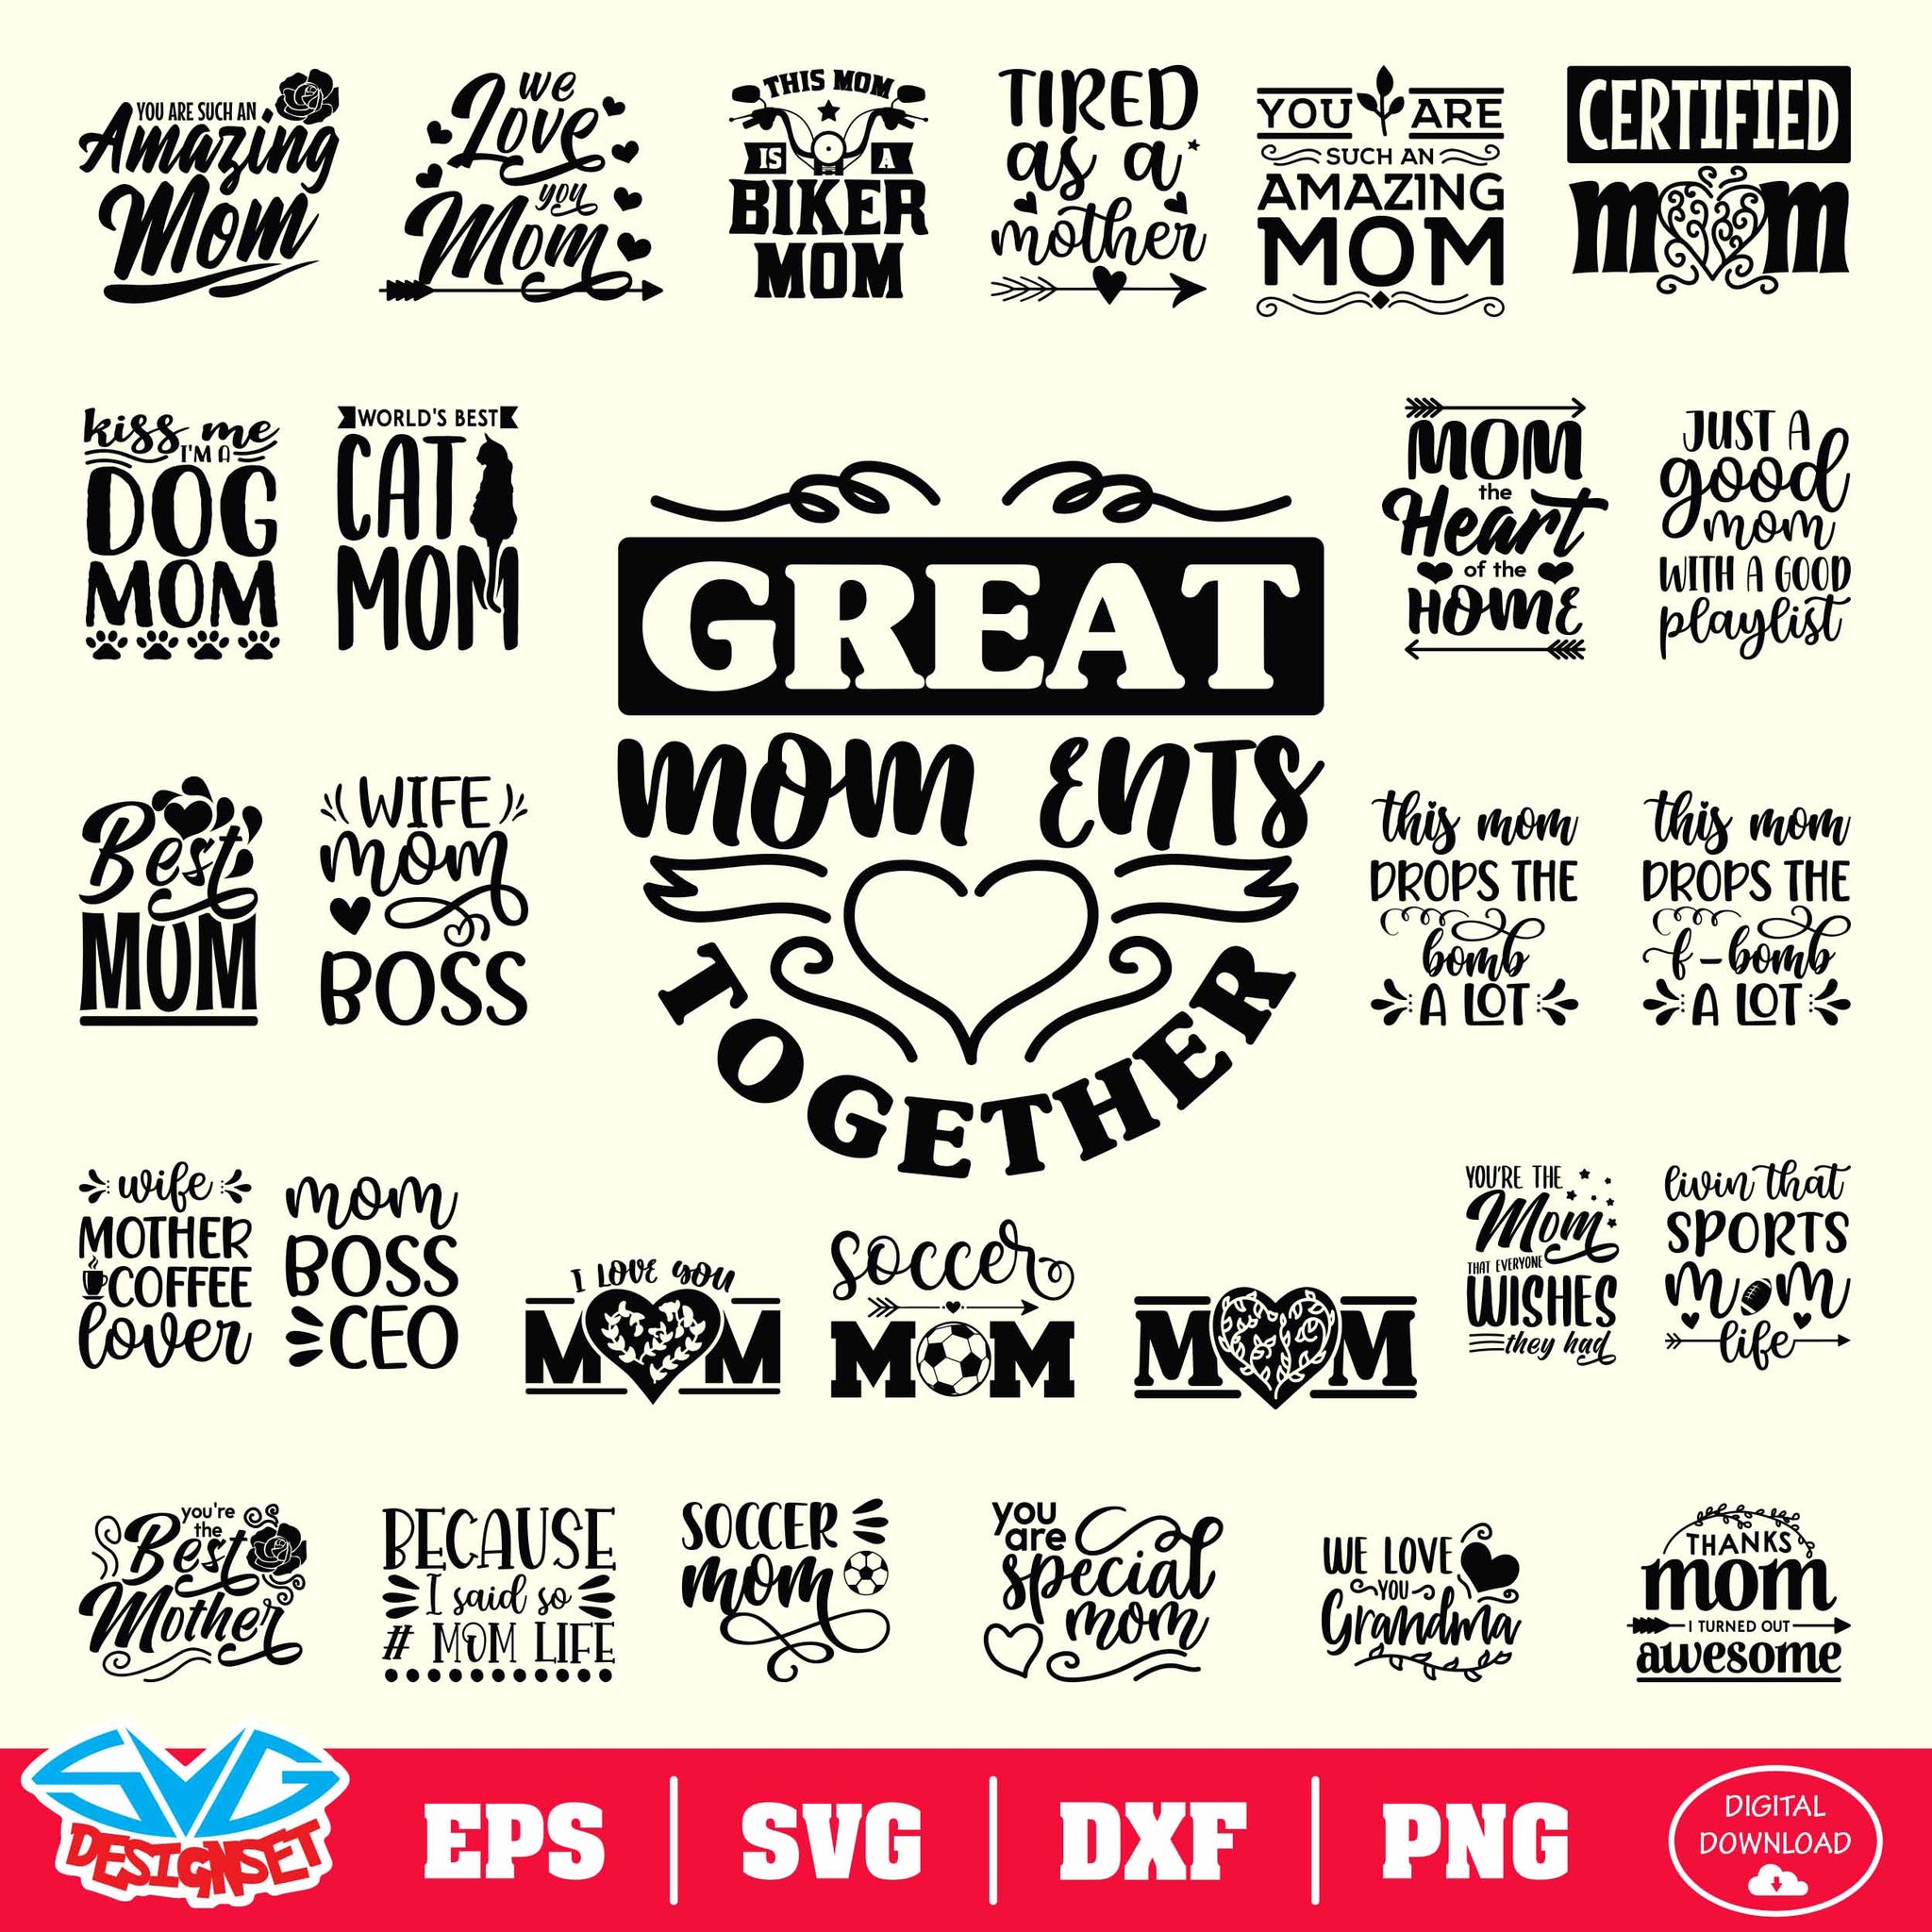 Happy Mother's Day Bundle Svg, Dxf, Eps, Png, Clipart, Silhouette and Cutfiles #1B - SVGDesignSets